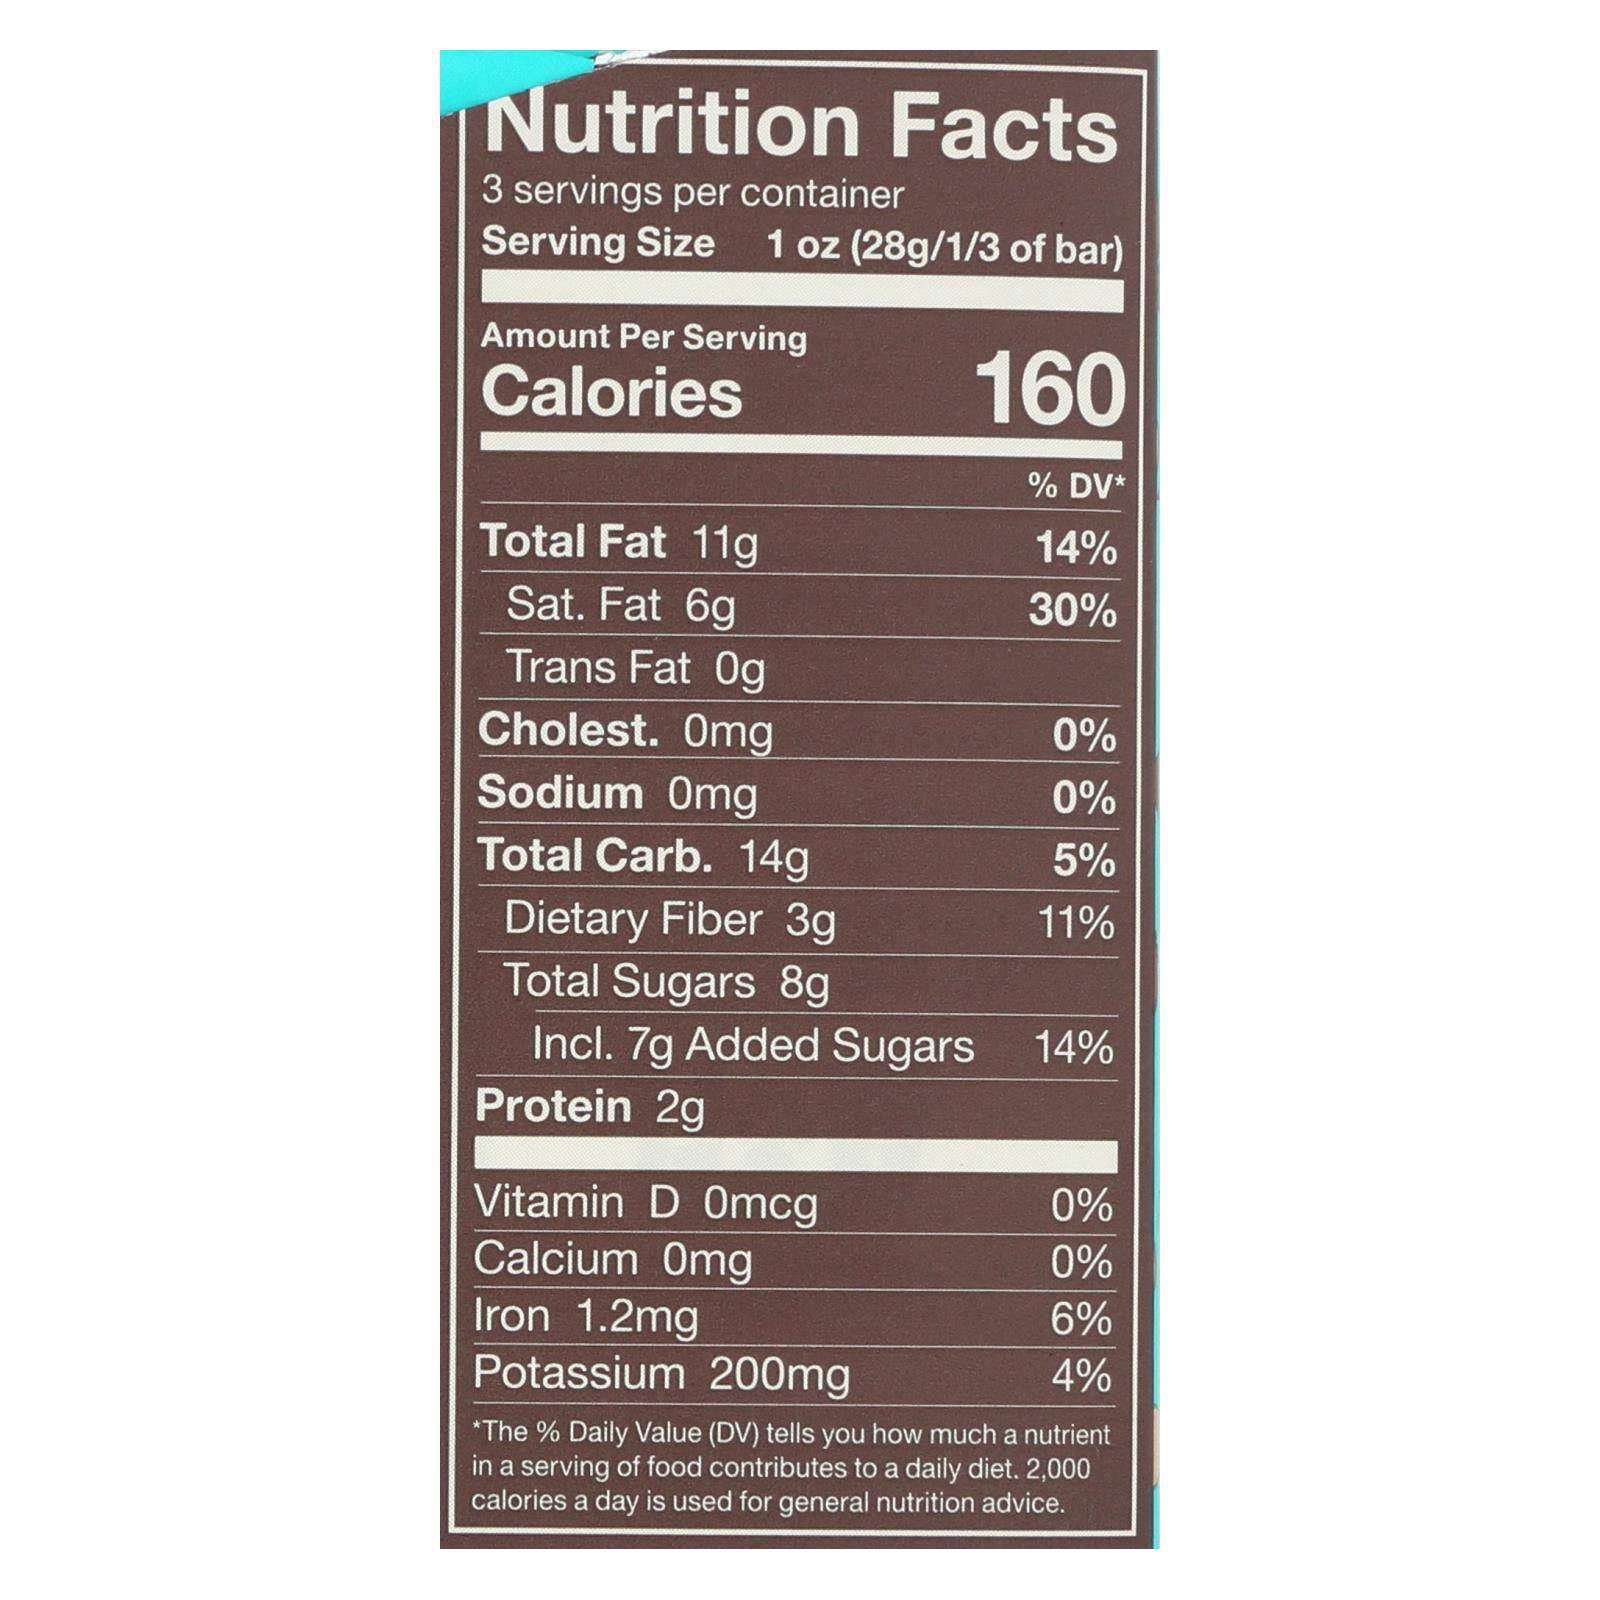 Buy Endangered Species Natural Chocolate Bars - Dark Chocolate - 72 Percent Cocoa - Cranberries And Almonds - 3 Oz Bars - Case Of 12  at OnlyNaturals.us